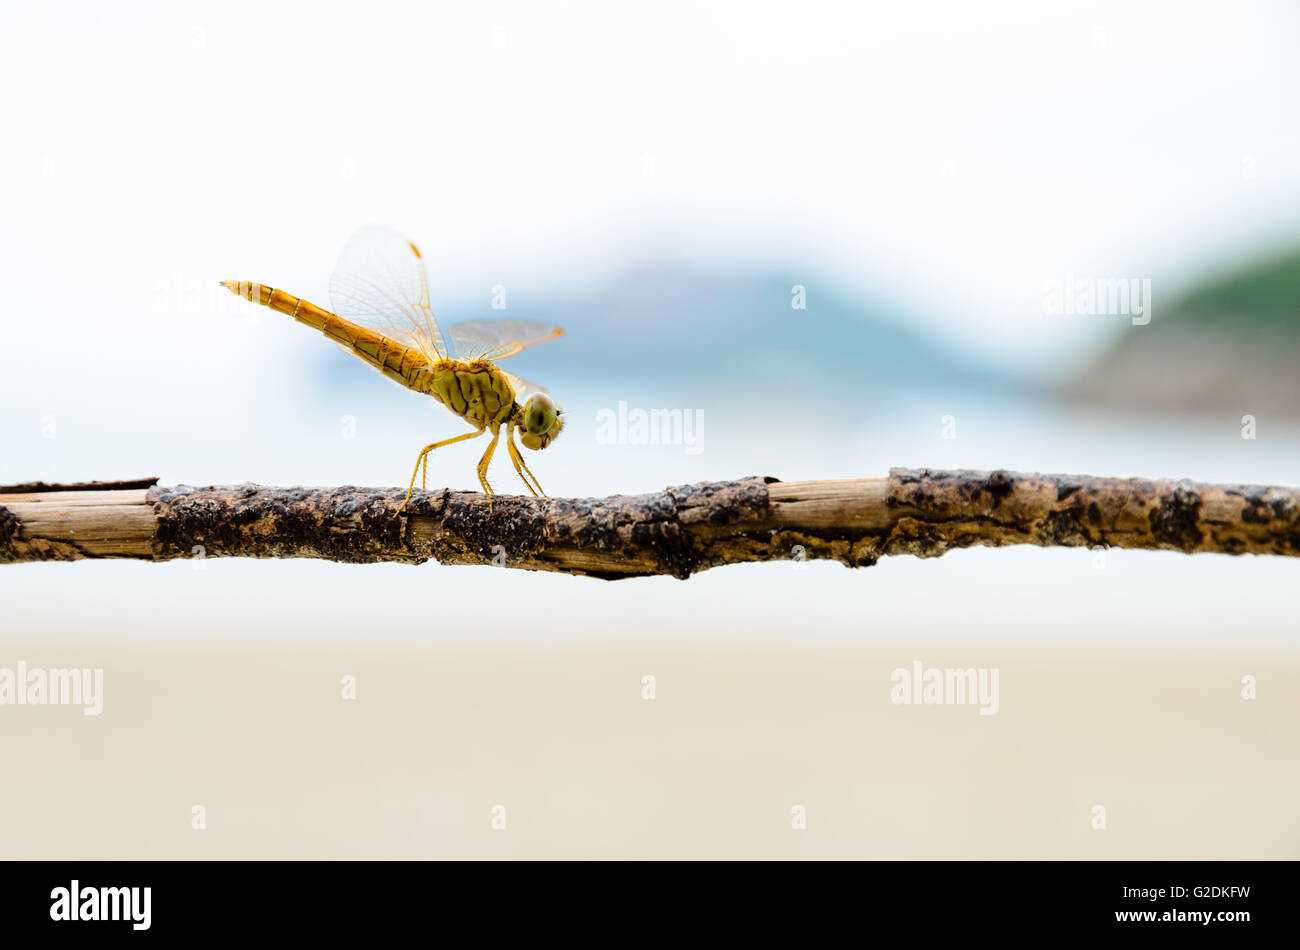 Pantala Flavescens, Globe Skimmer or Wandering Glider, Yellow dragonfly perched on a branch at the beach Stock Photo